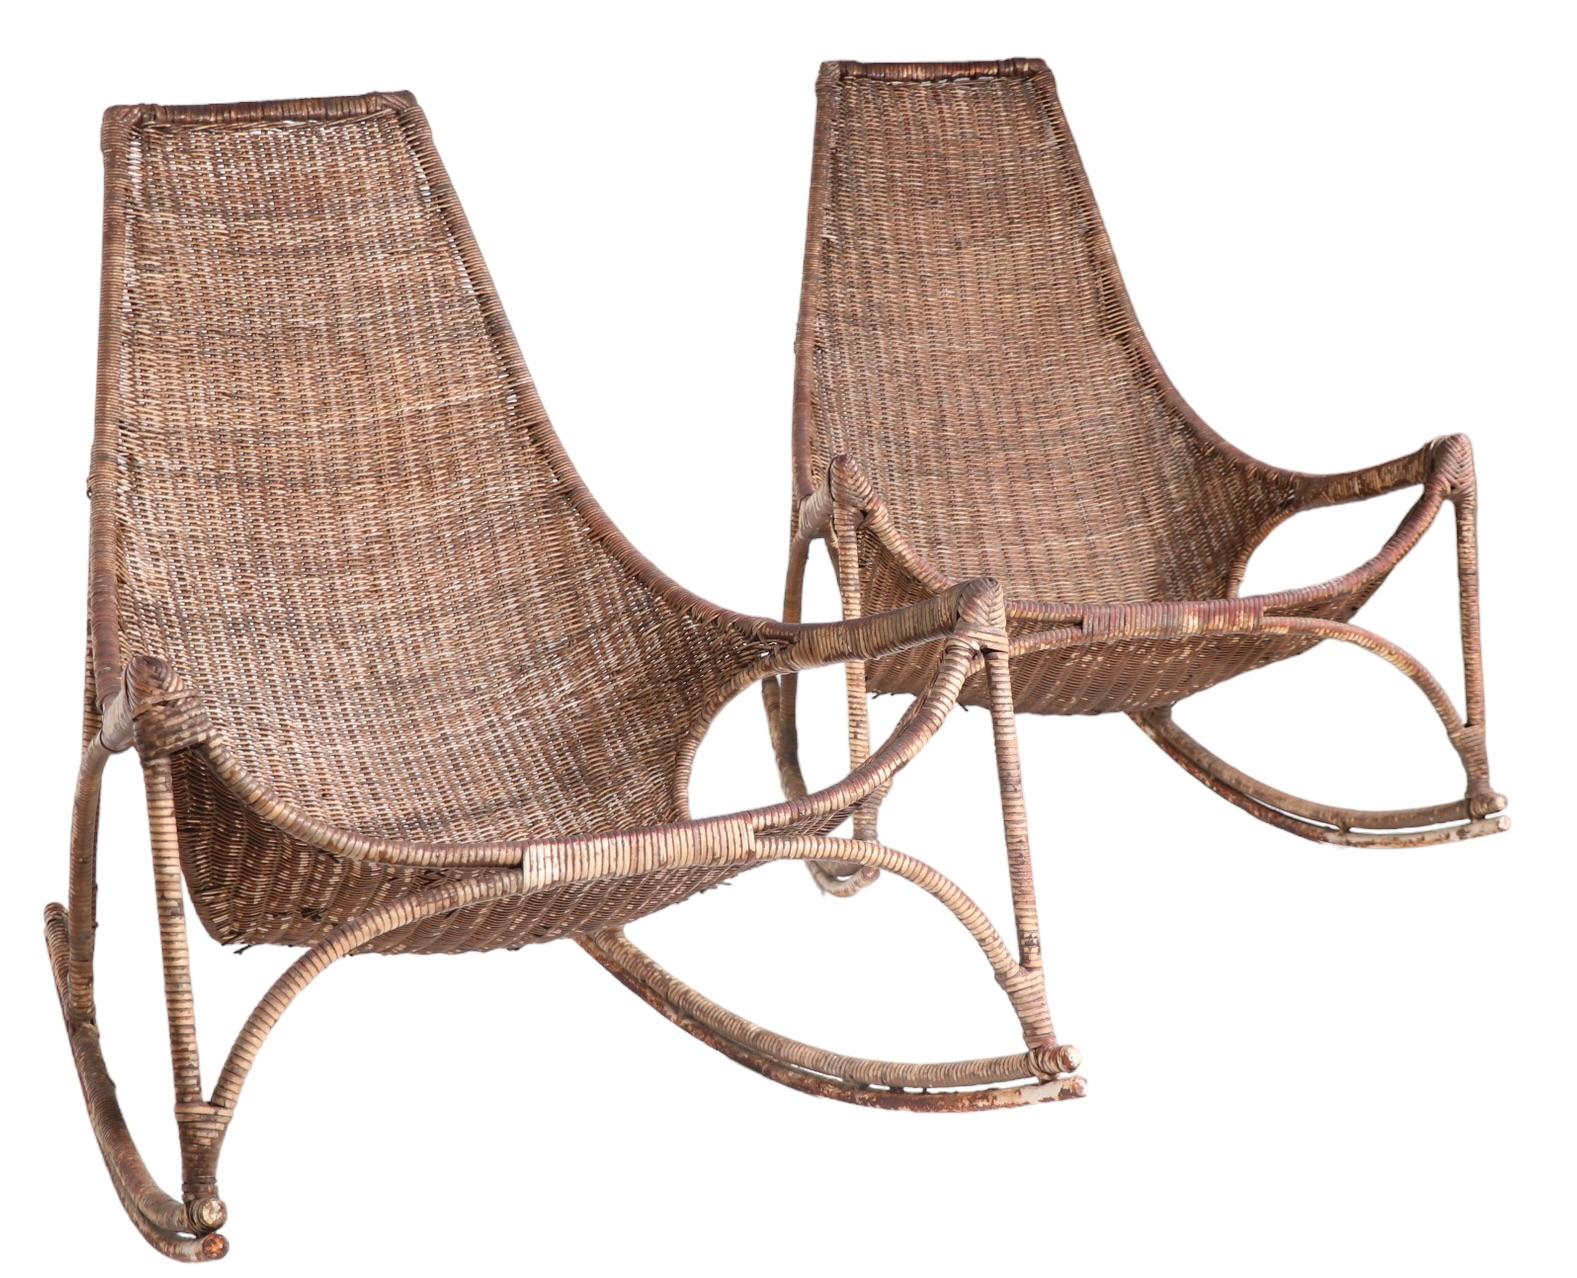 Pr. Wicker Rocking Chairs by Francis Mair c 1950/1960's For Sale 4